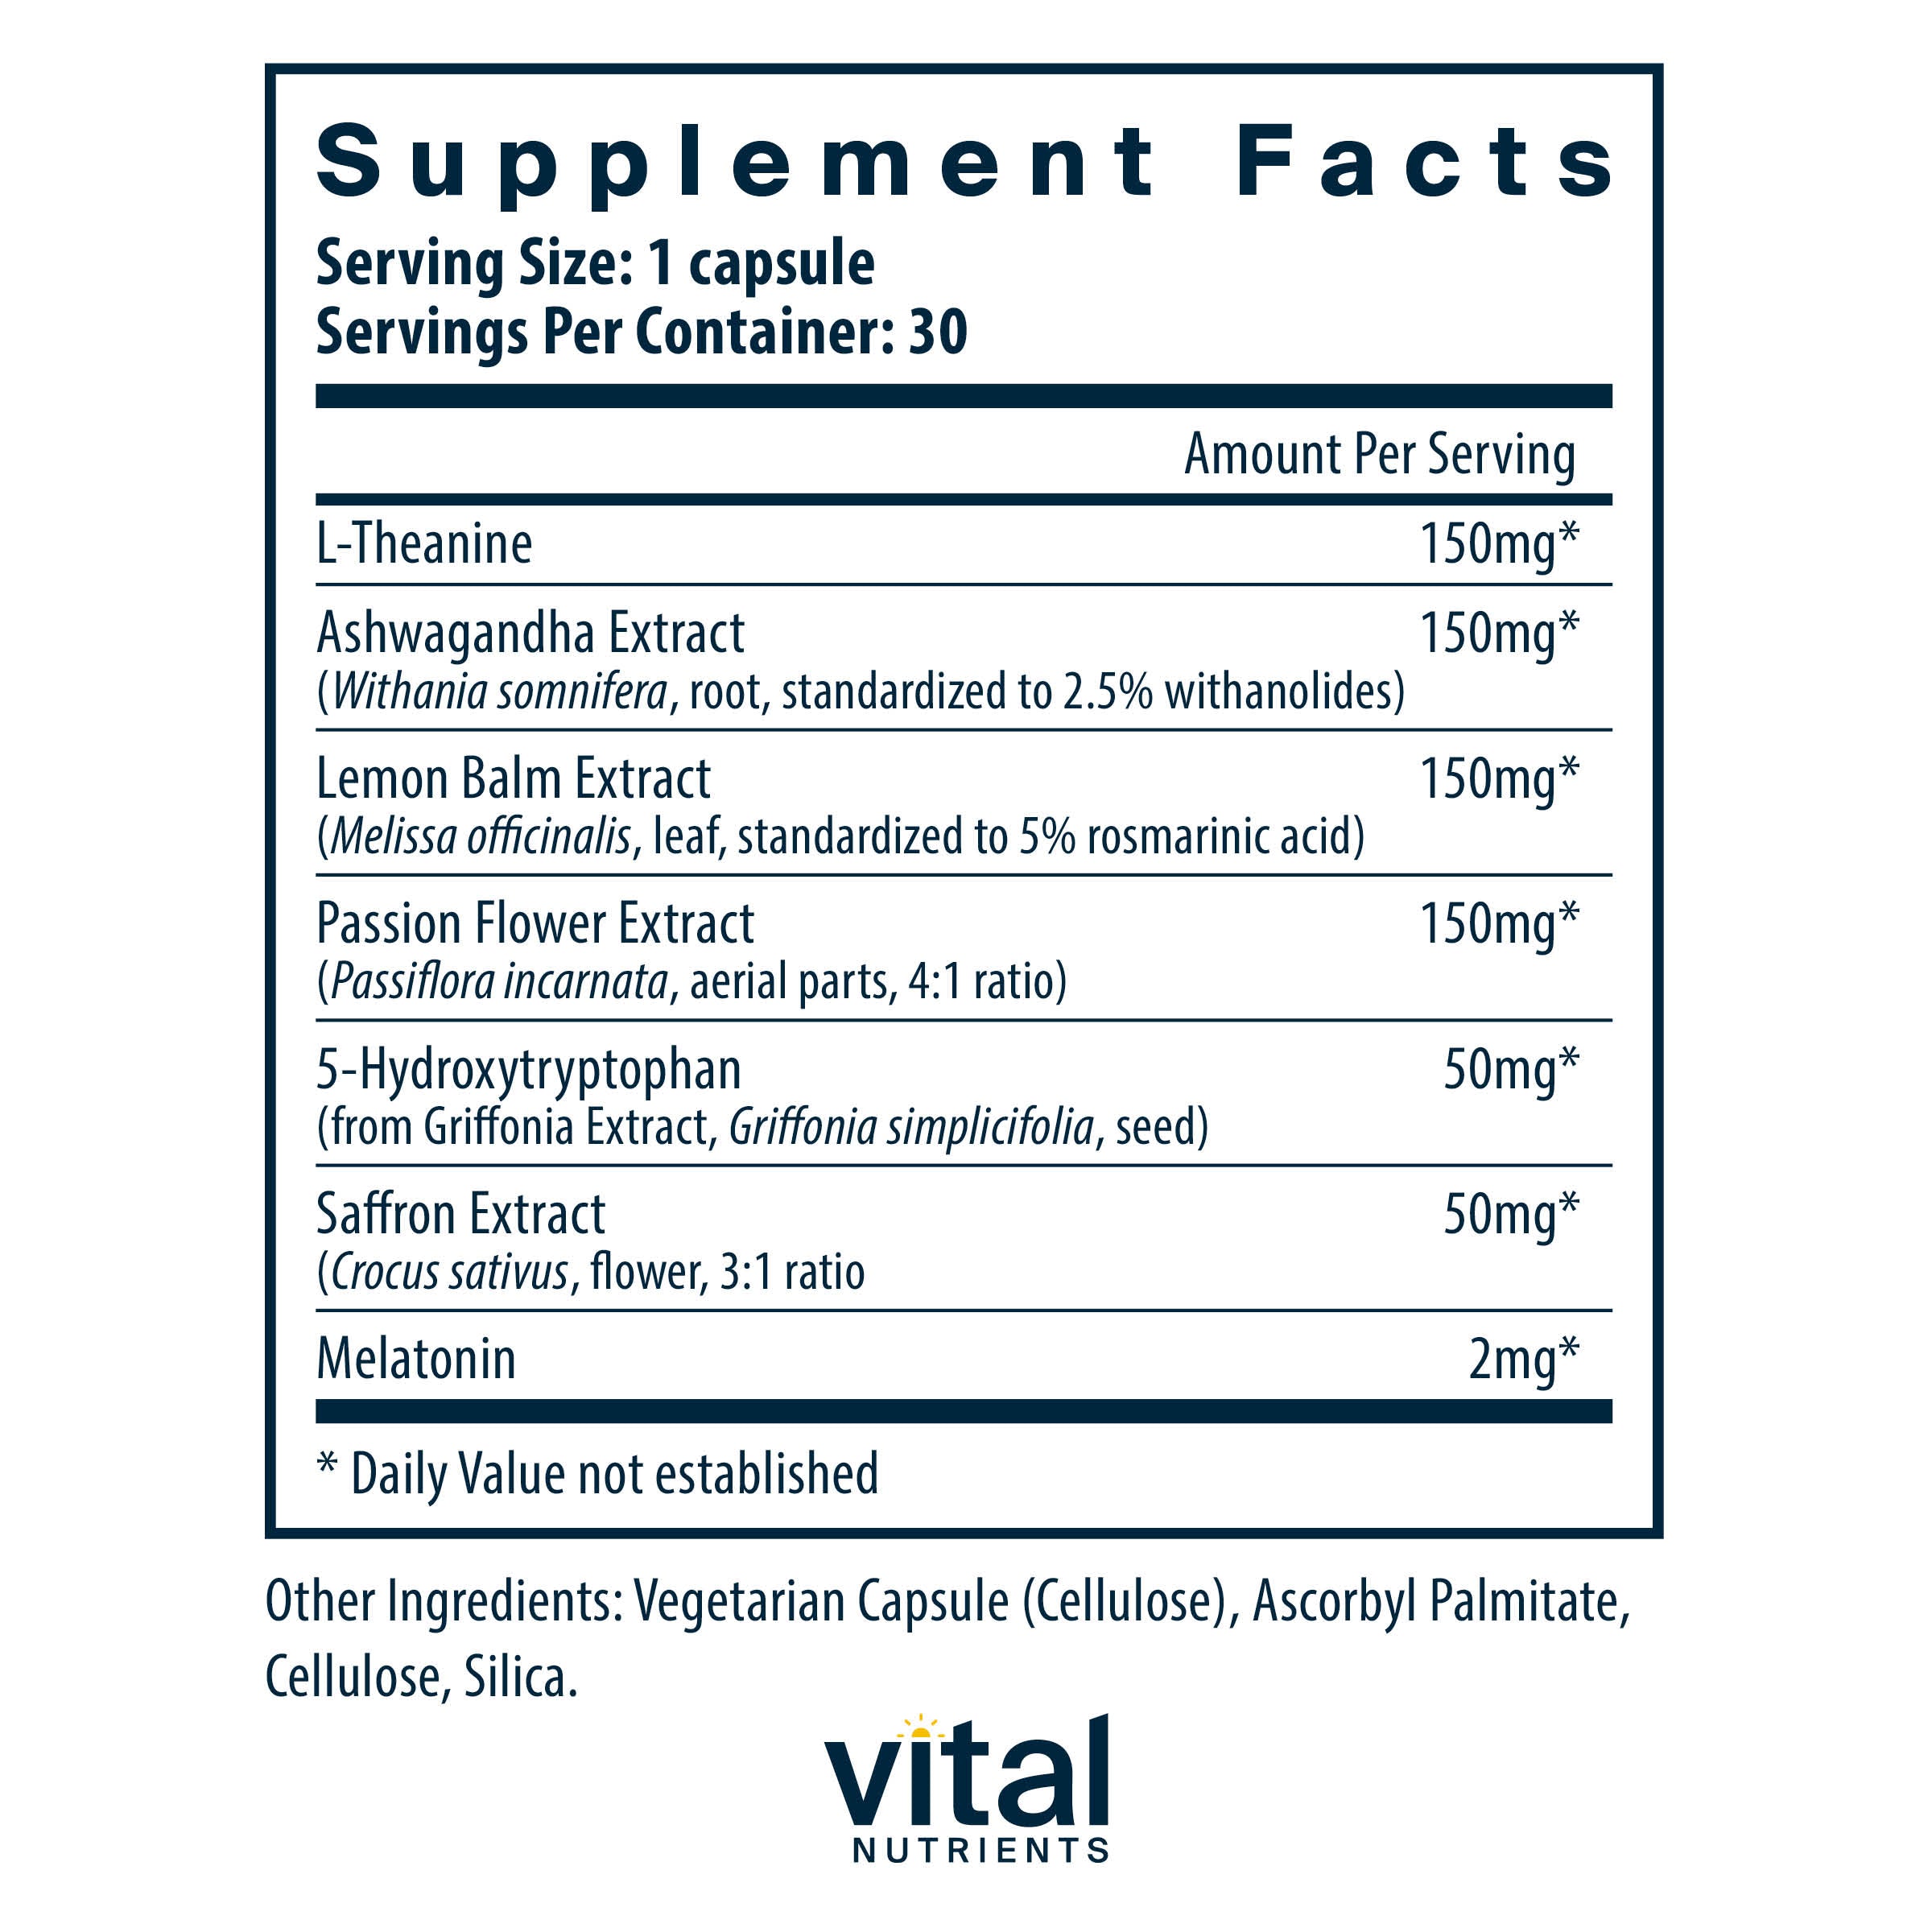 Vital Nutrients Sleep and Recover supplement Facts panel